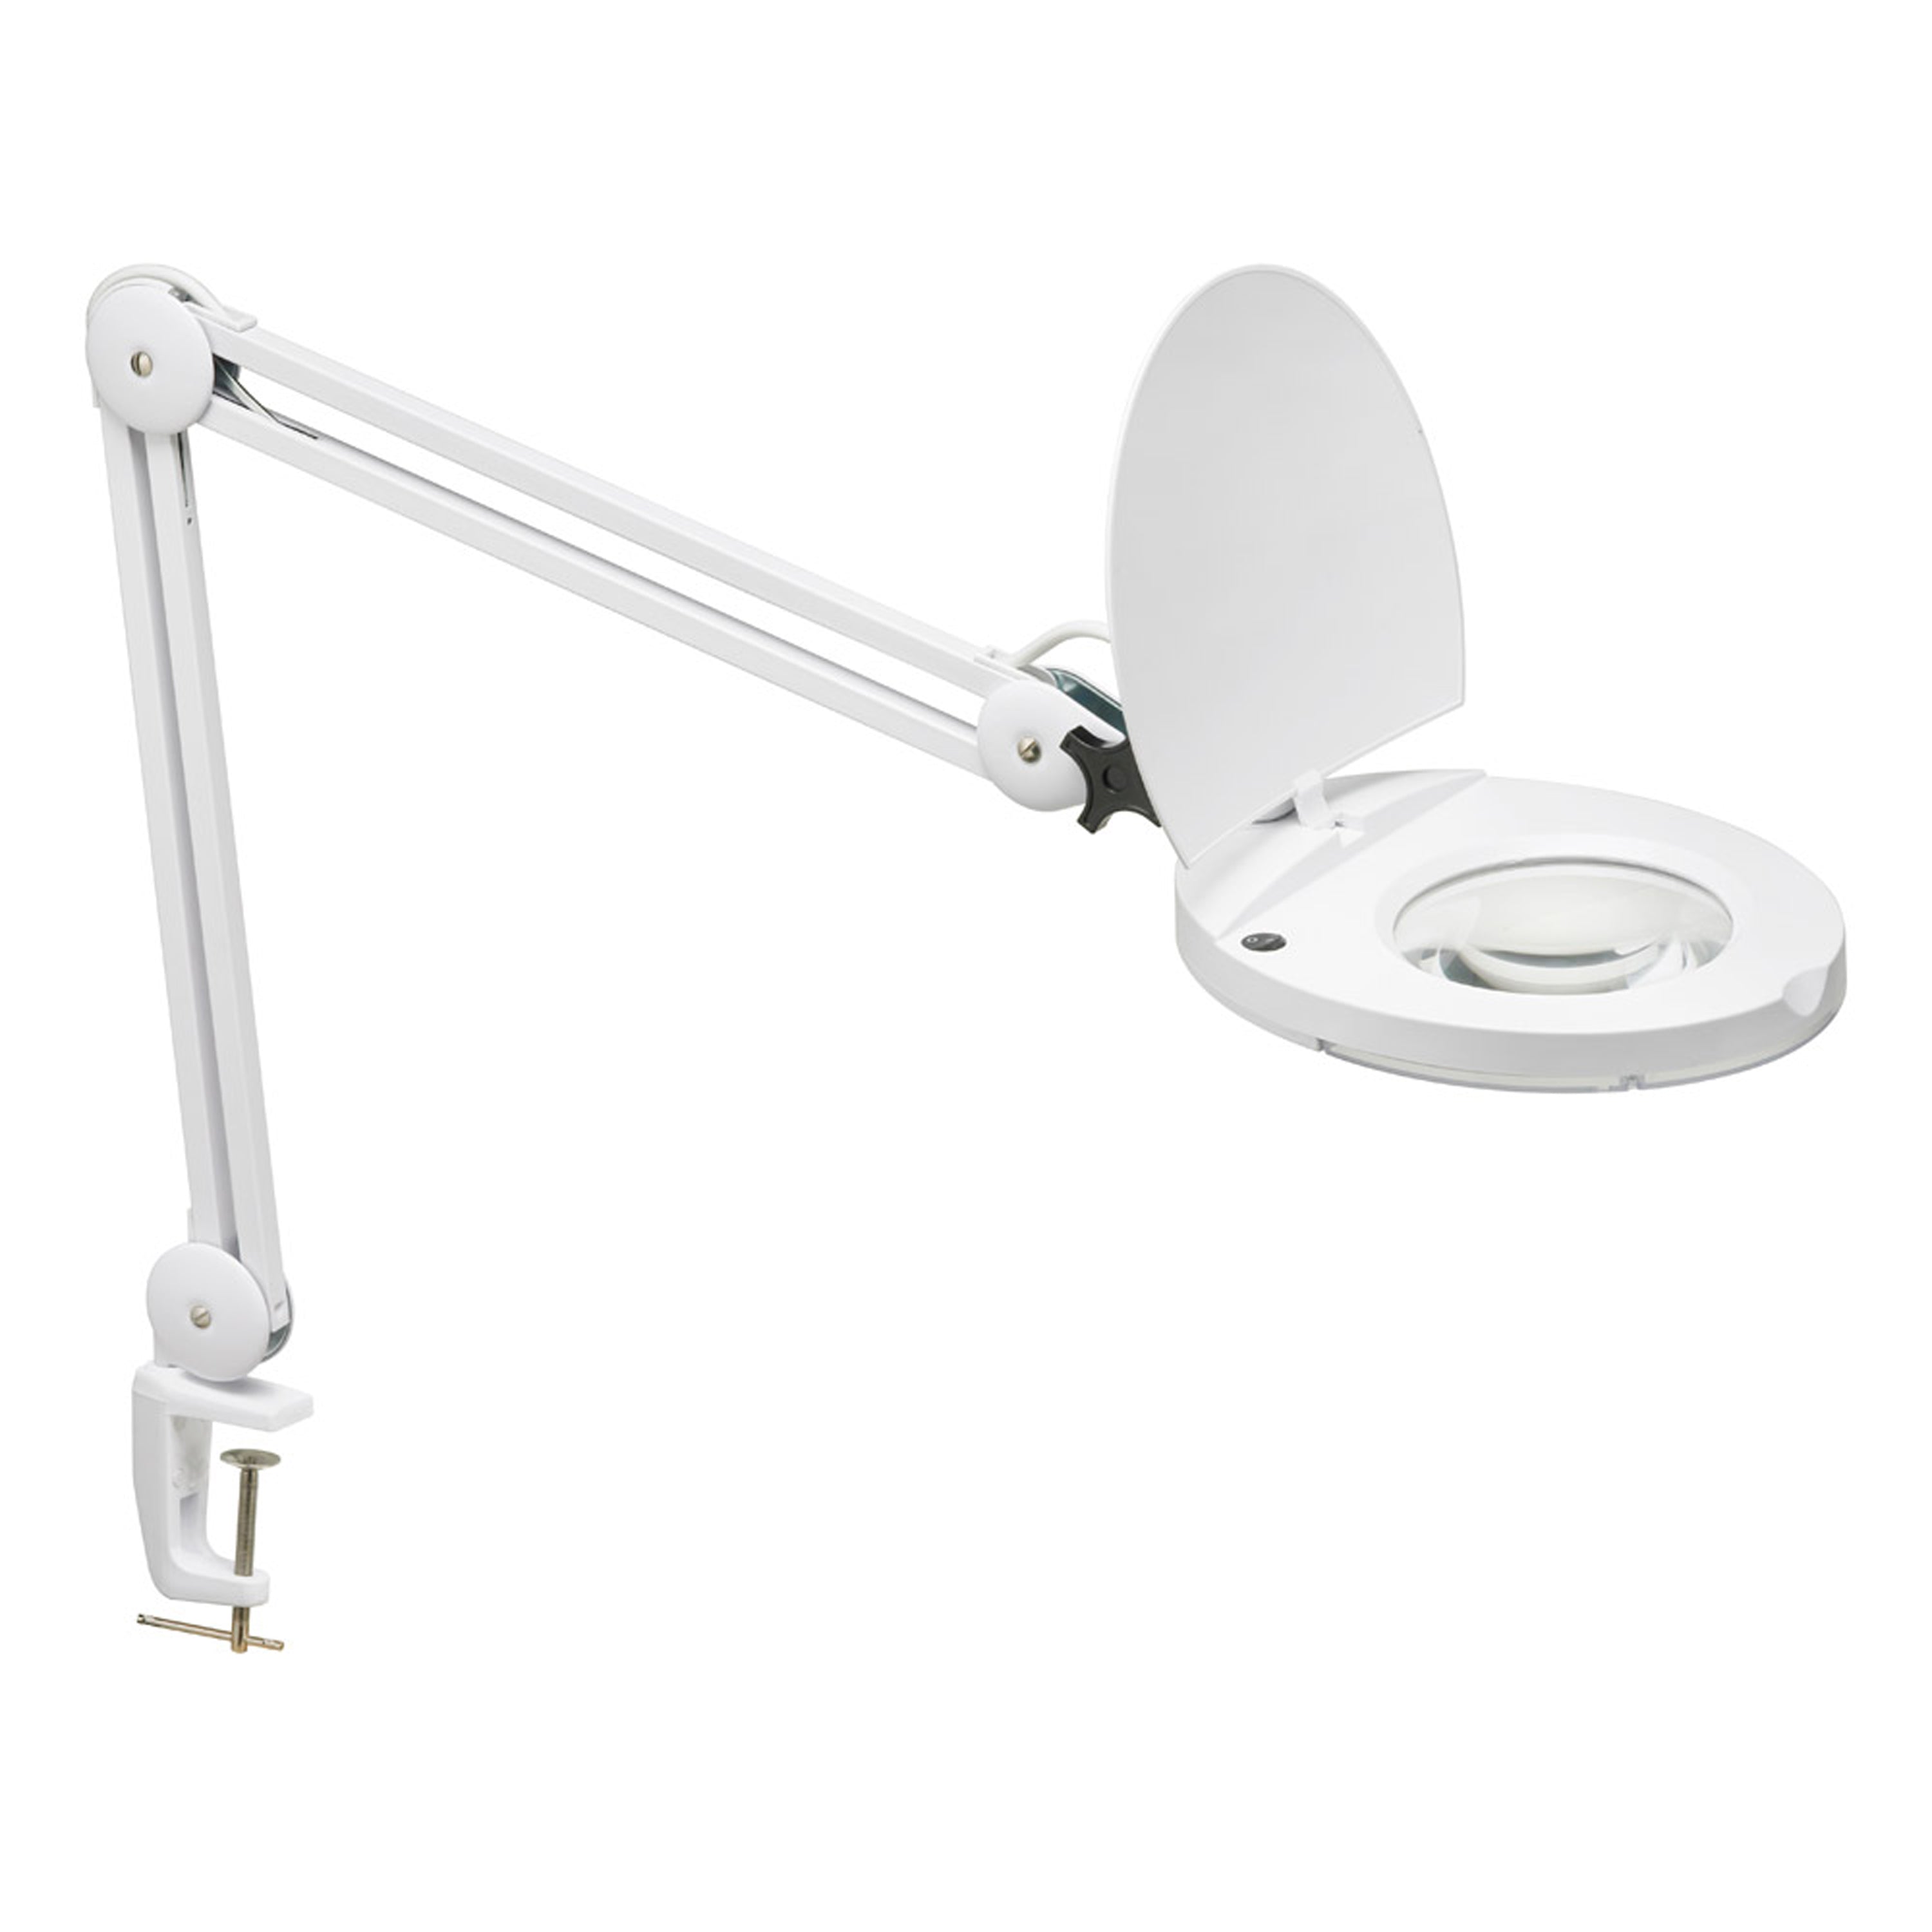 Table lamp White INTEGRATED LED - DMLED10-A-WH | DAINOLITE